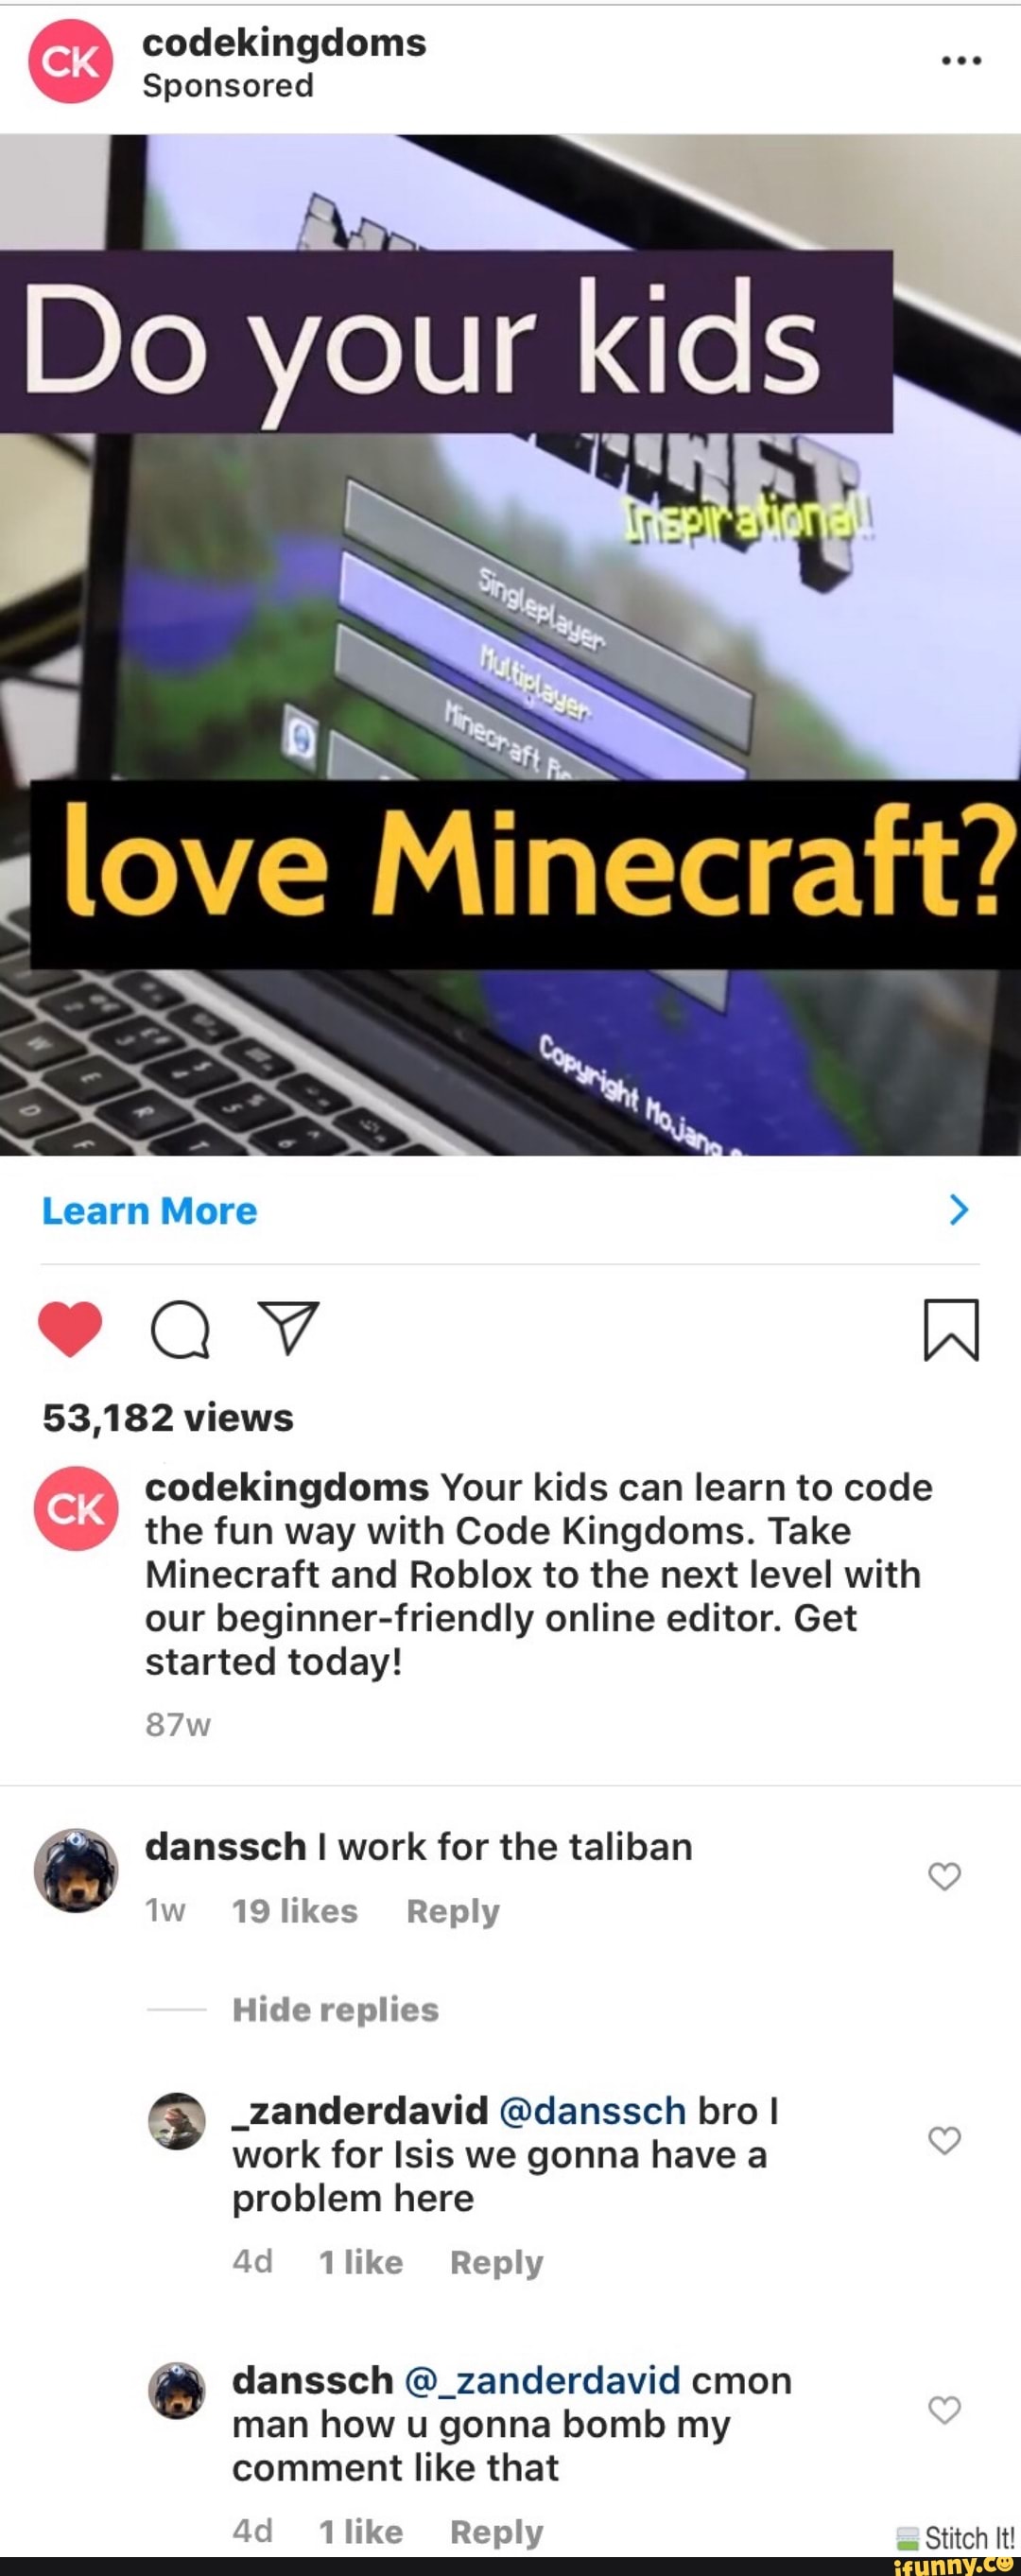 Wee Sponsored Q Codekingdoms Your Kids Can Learn To Code The Fun Way With Code Kingdoms Take Minecraft And Roblox To The Next Level With Our Beginner Friendly Online Editor Get Started Today - roblox next level